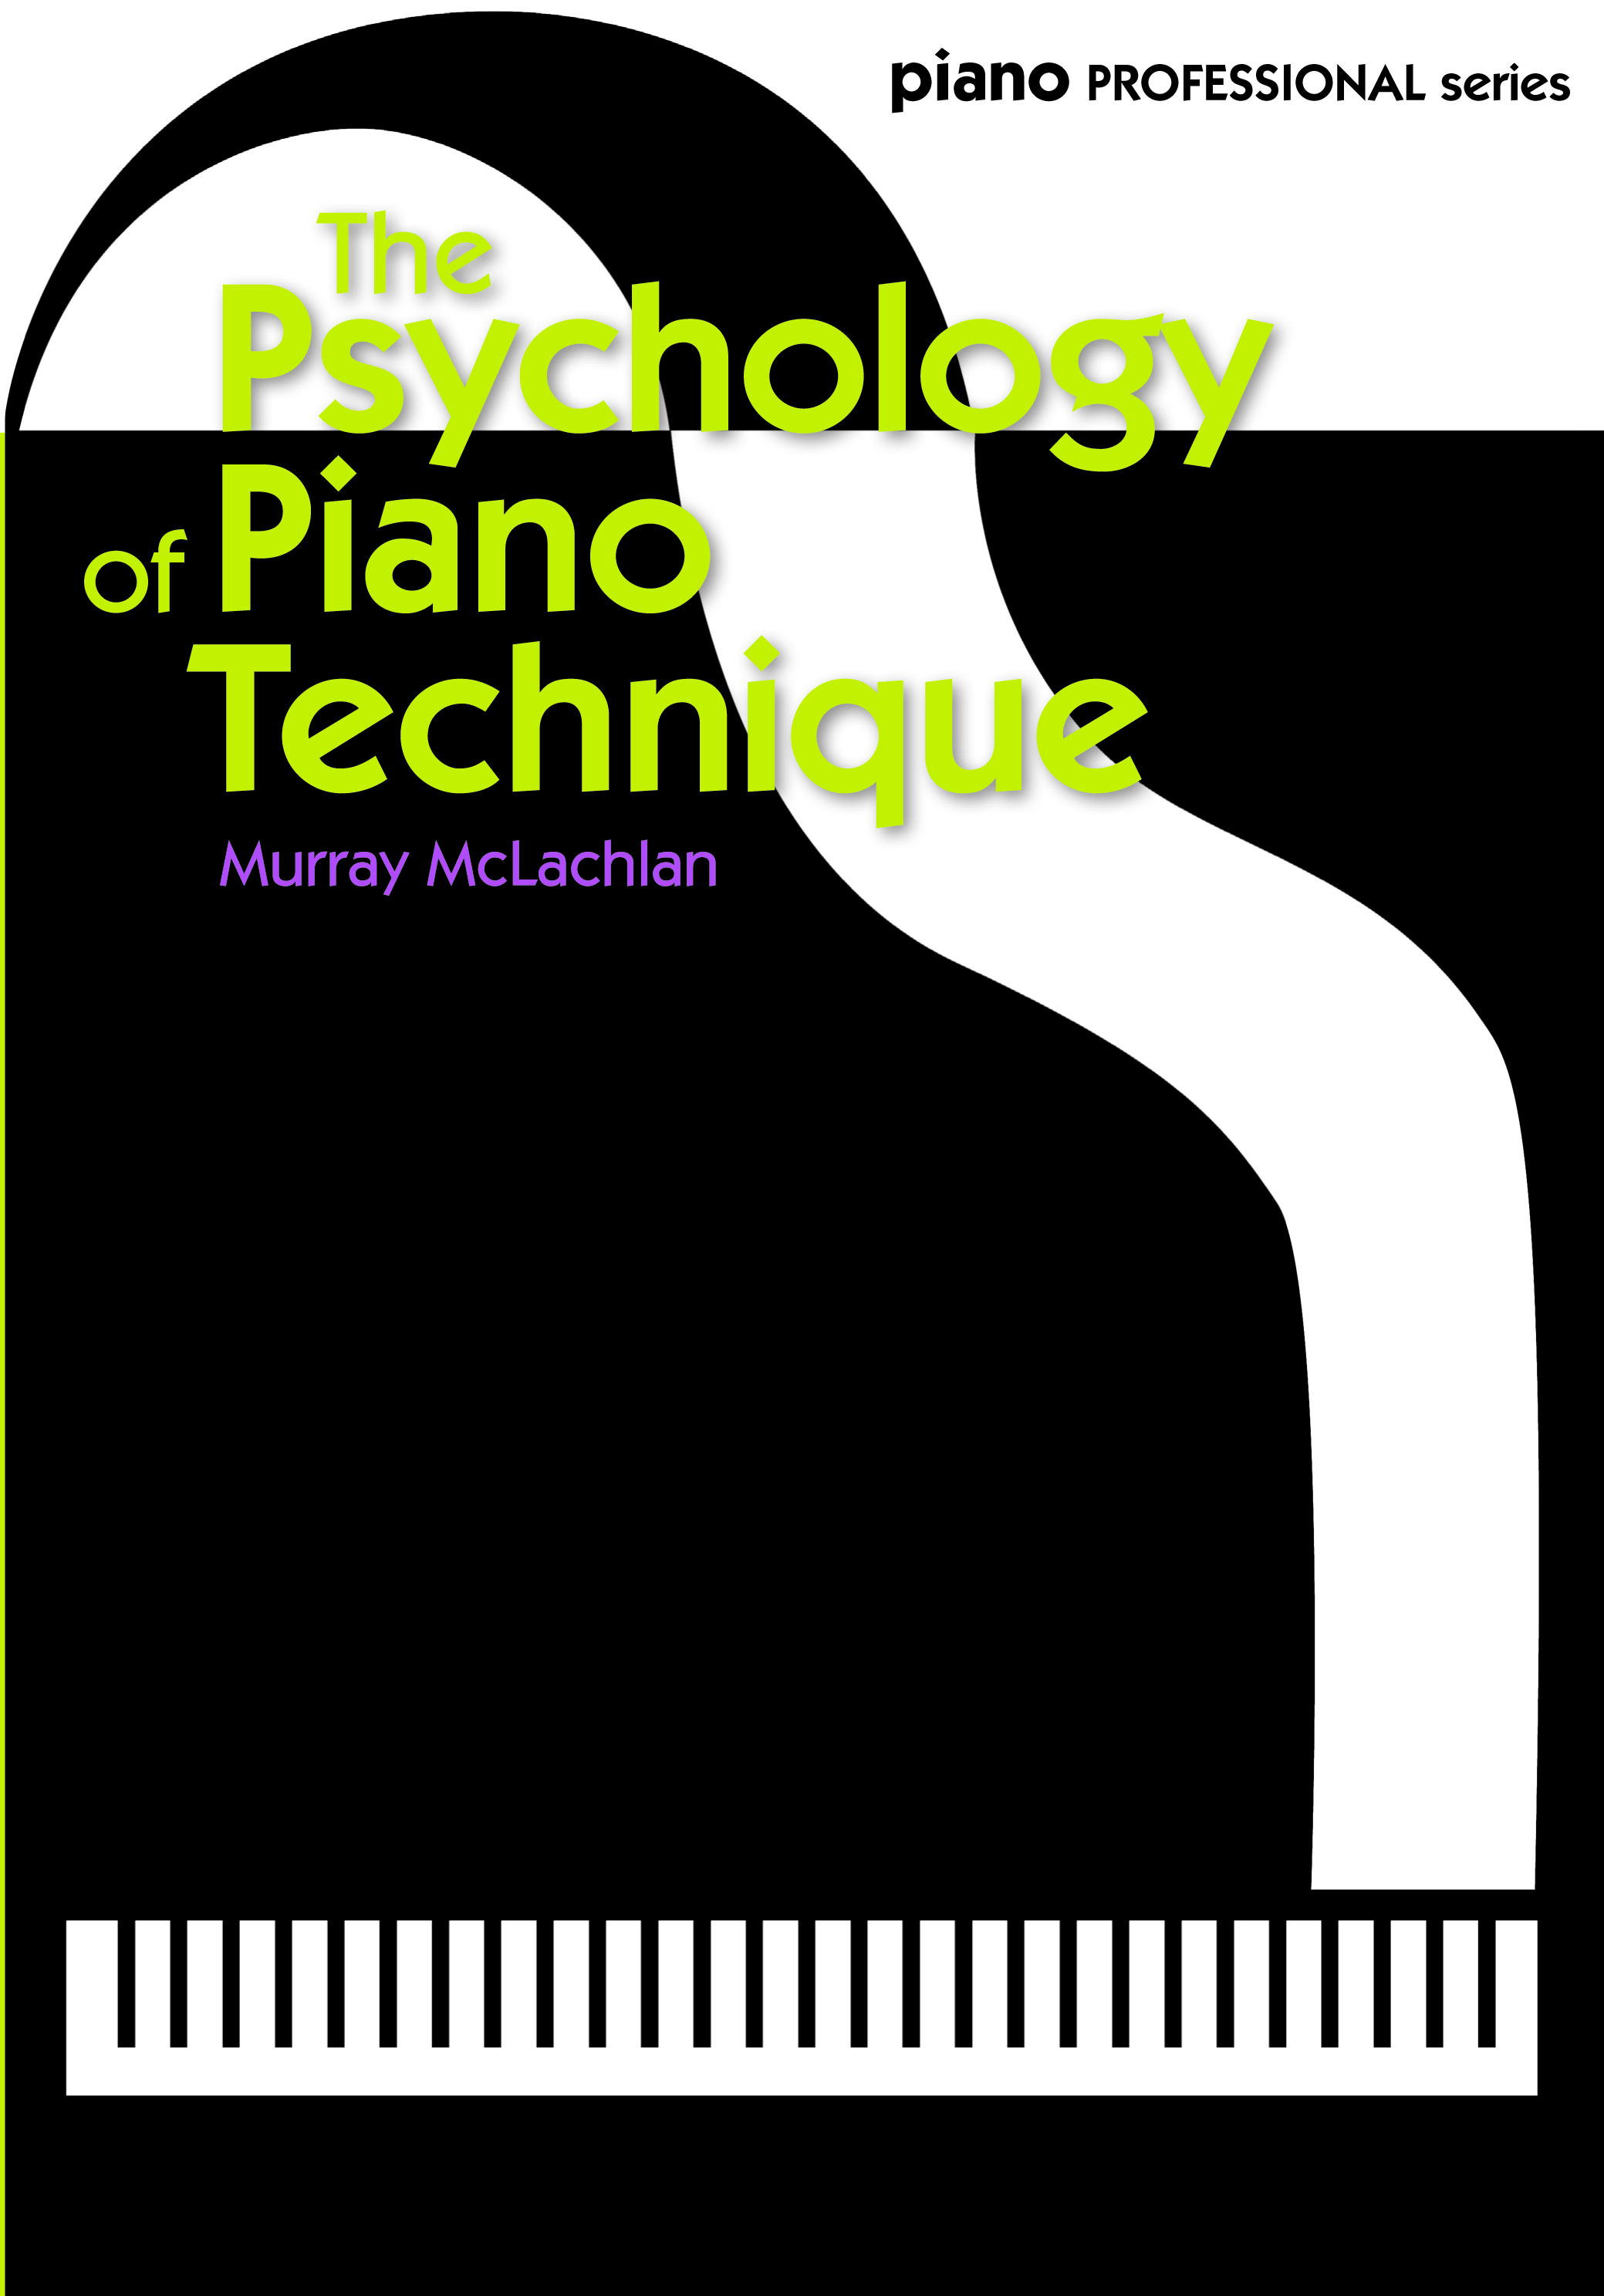 The Psychology of Piano Technique (MC LACHLAN MURRAY)